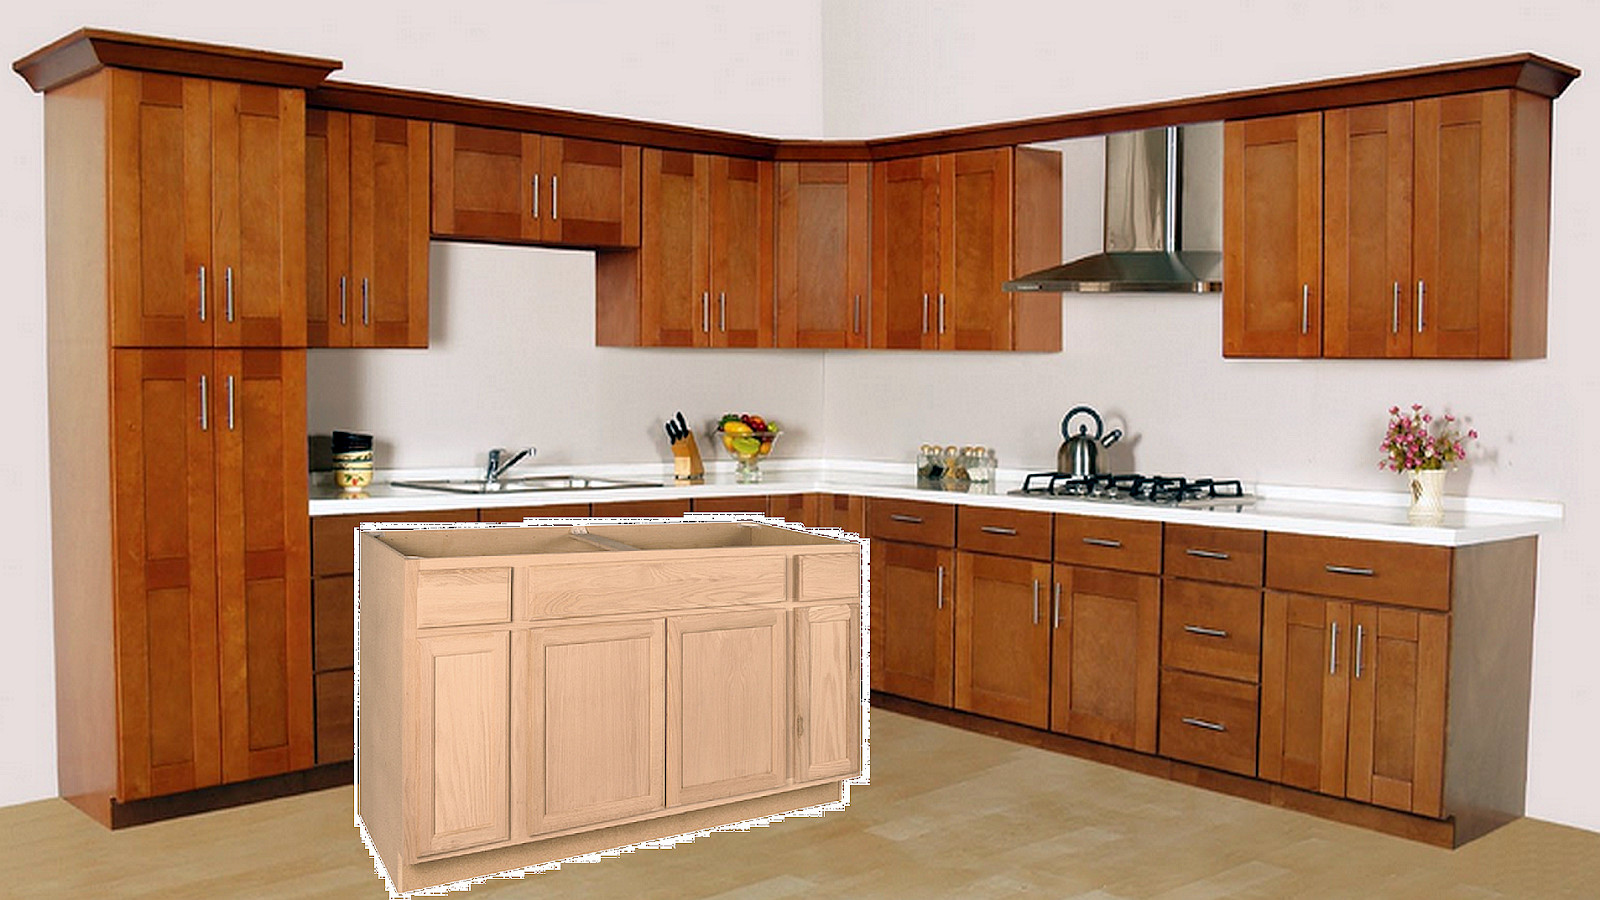 Home Depot Kitchen Cabinet Paint
 how to finish unfinished kitchen cabinets